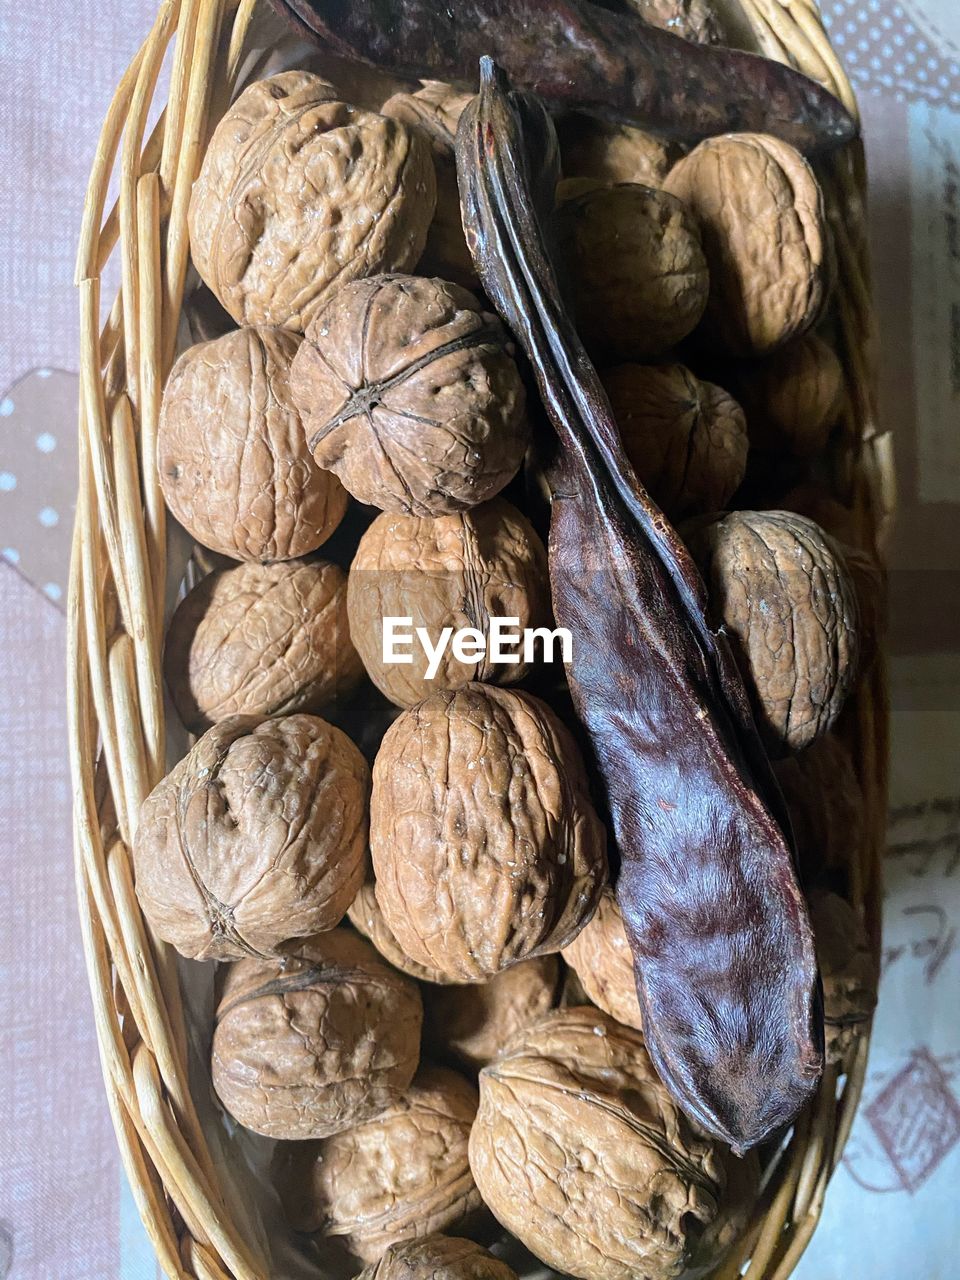 food, food and drink, basket, healthy eating, freshness, wellbeing, produce, container, still life, nuts & seeds, no people, indoors, walnut, plant, large group of objects, high angle view, abundance, close-up, nut, wicker, nut - food, dried food, vegetable, directly above, ingredient, fruit